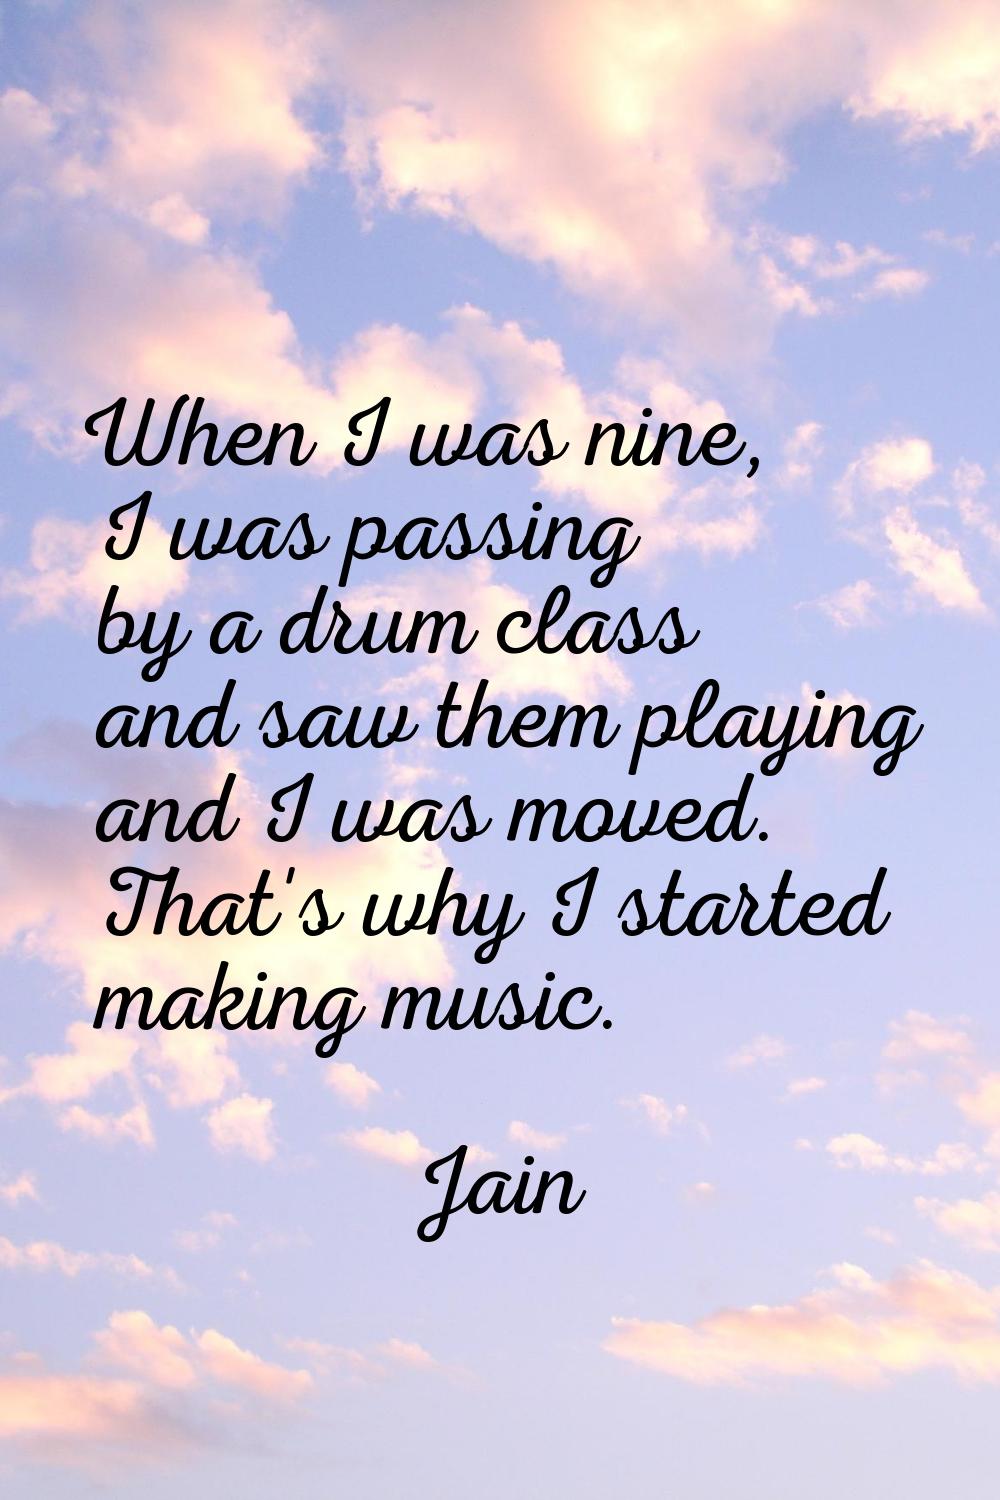 When I was nine, I was passing by a drum class and saw them playing and I was moved. That's why I s